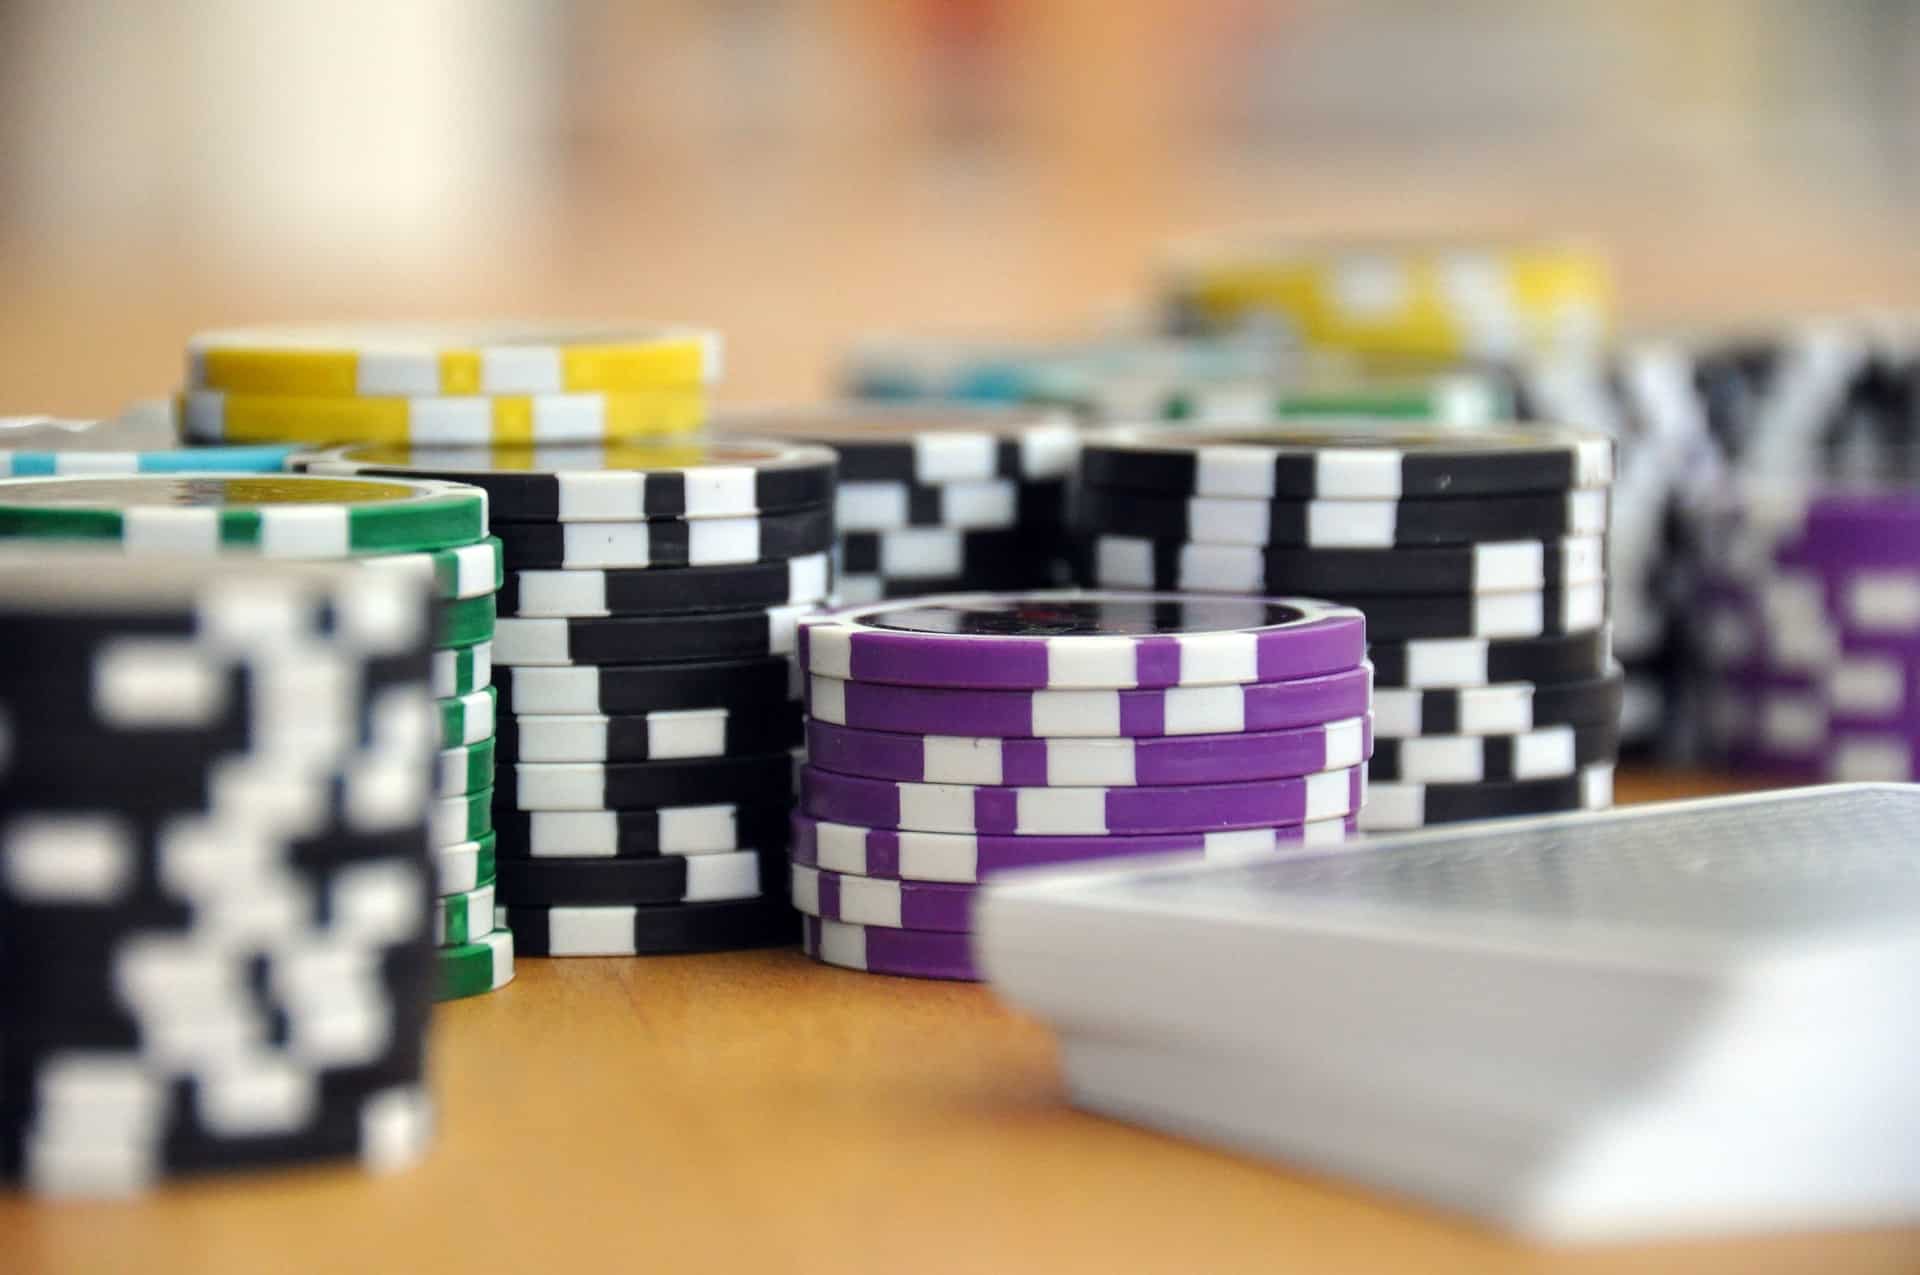 How To Start Your Own Online Casino